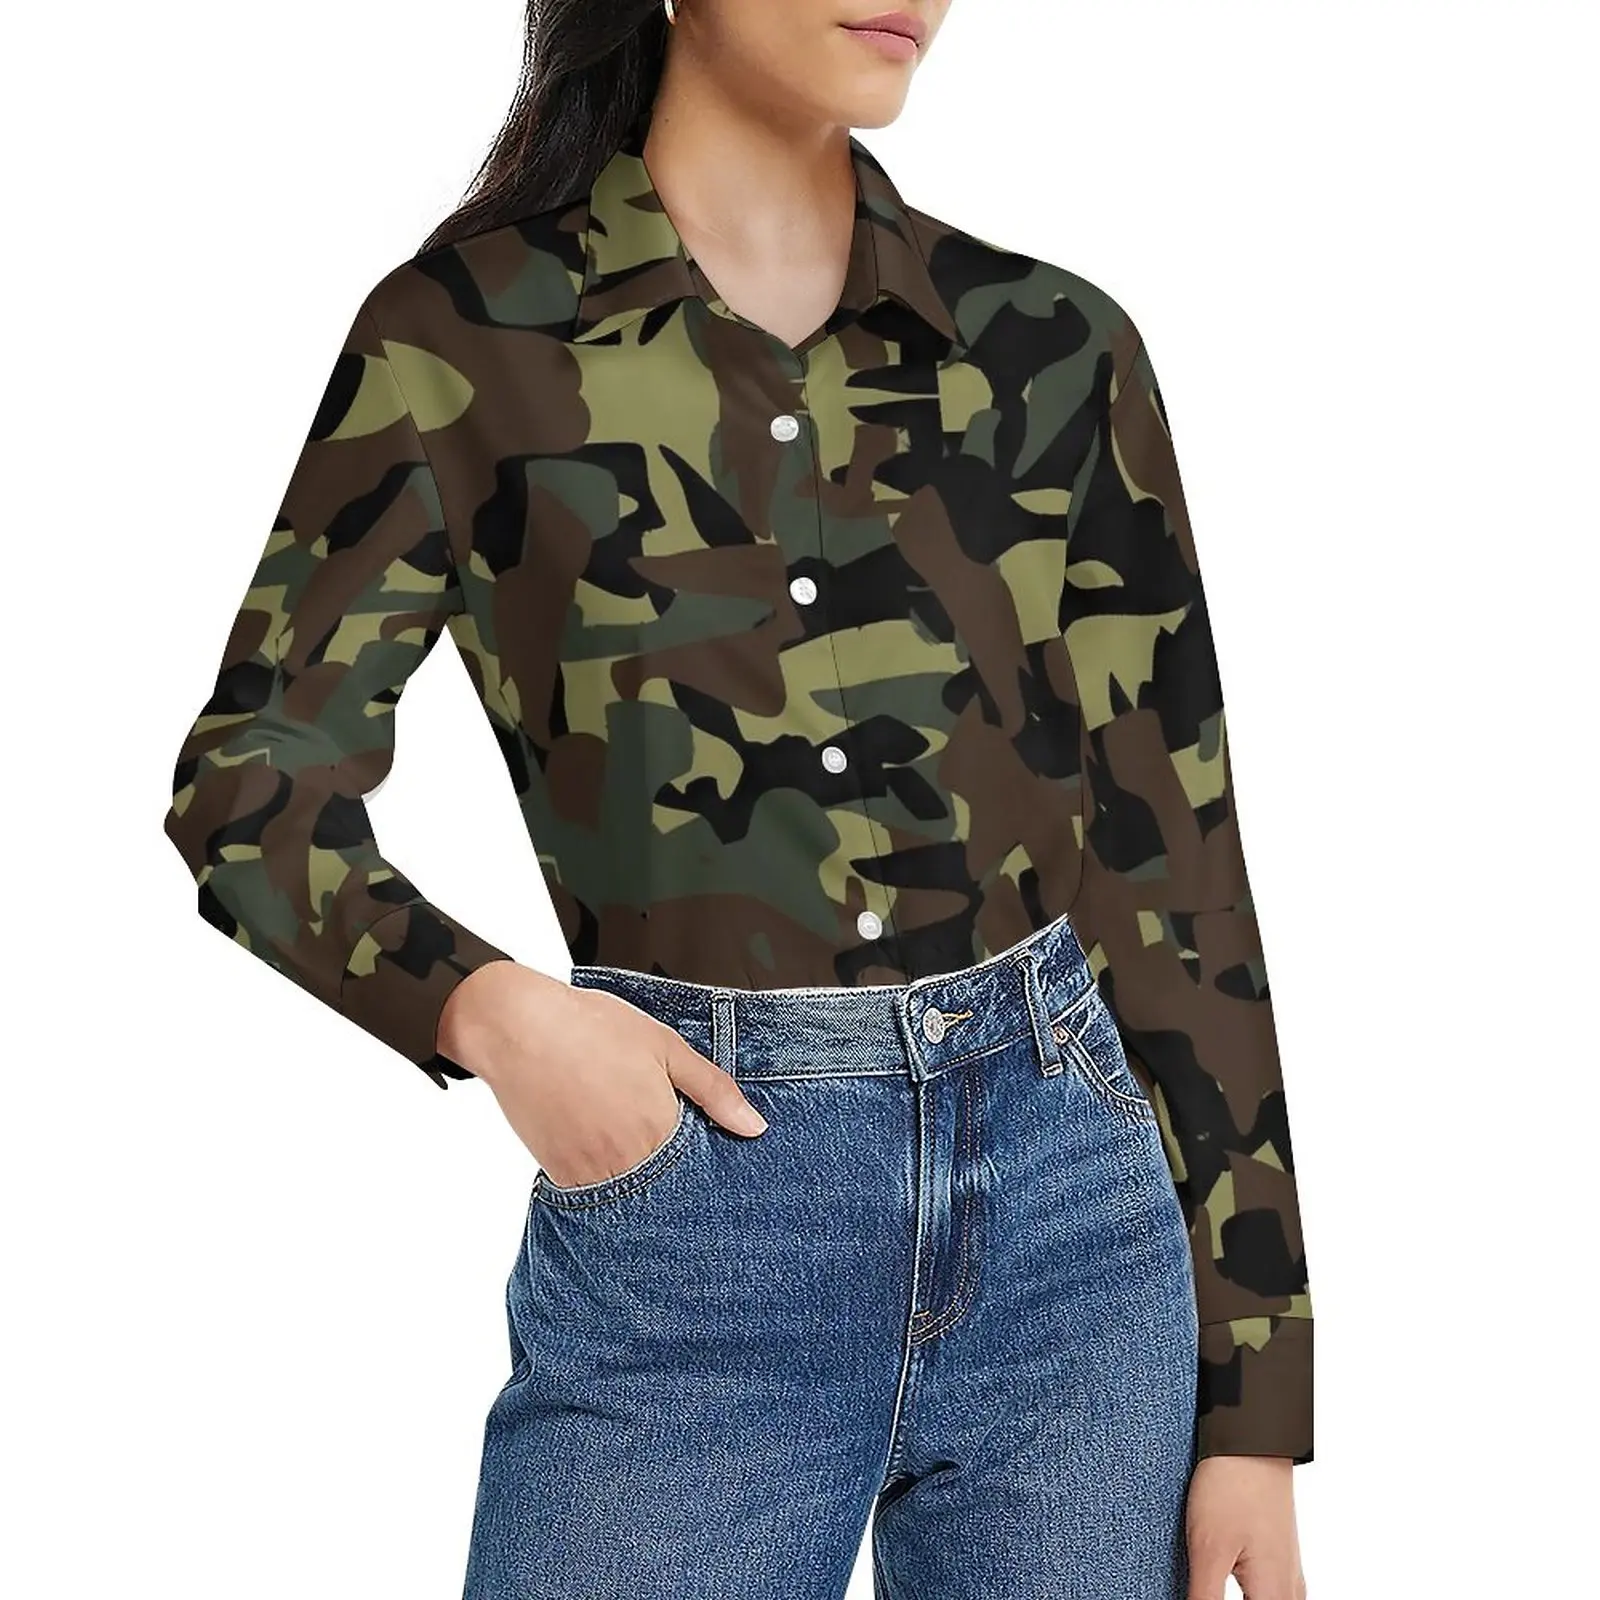 

Camo Print Blouse Army Camouflage Funny Design Blouses Woman Long-Sleeve Streetwear Shirt Autumn Oversized Tops